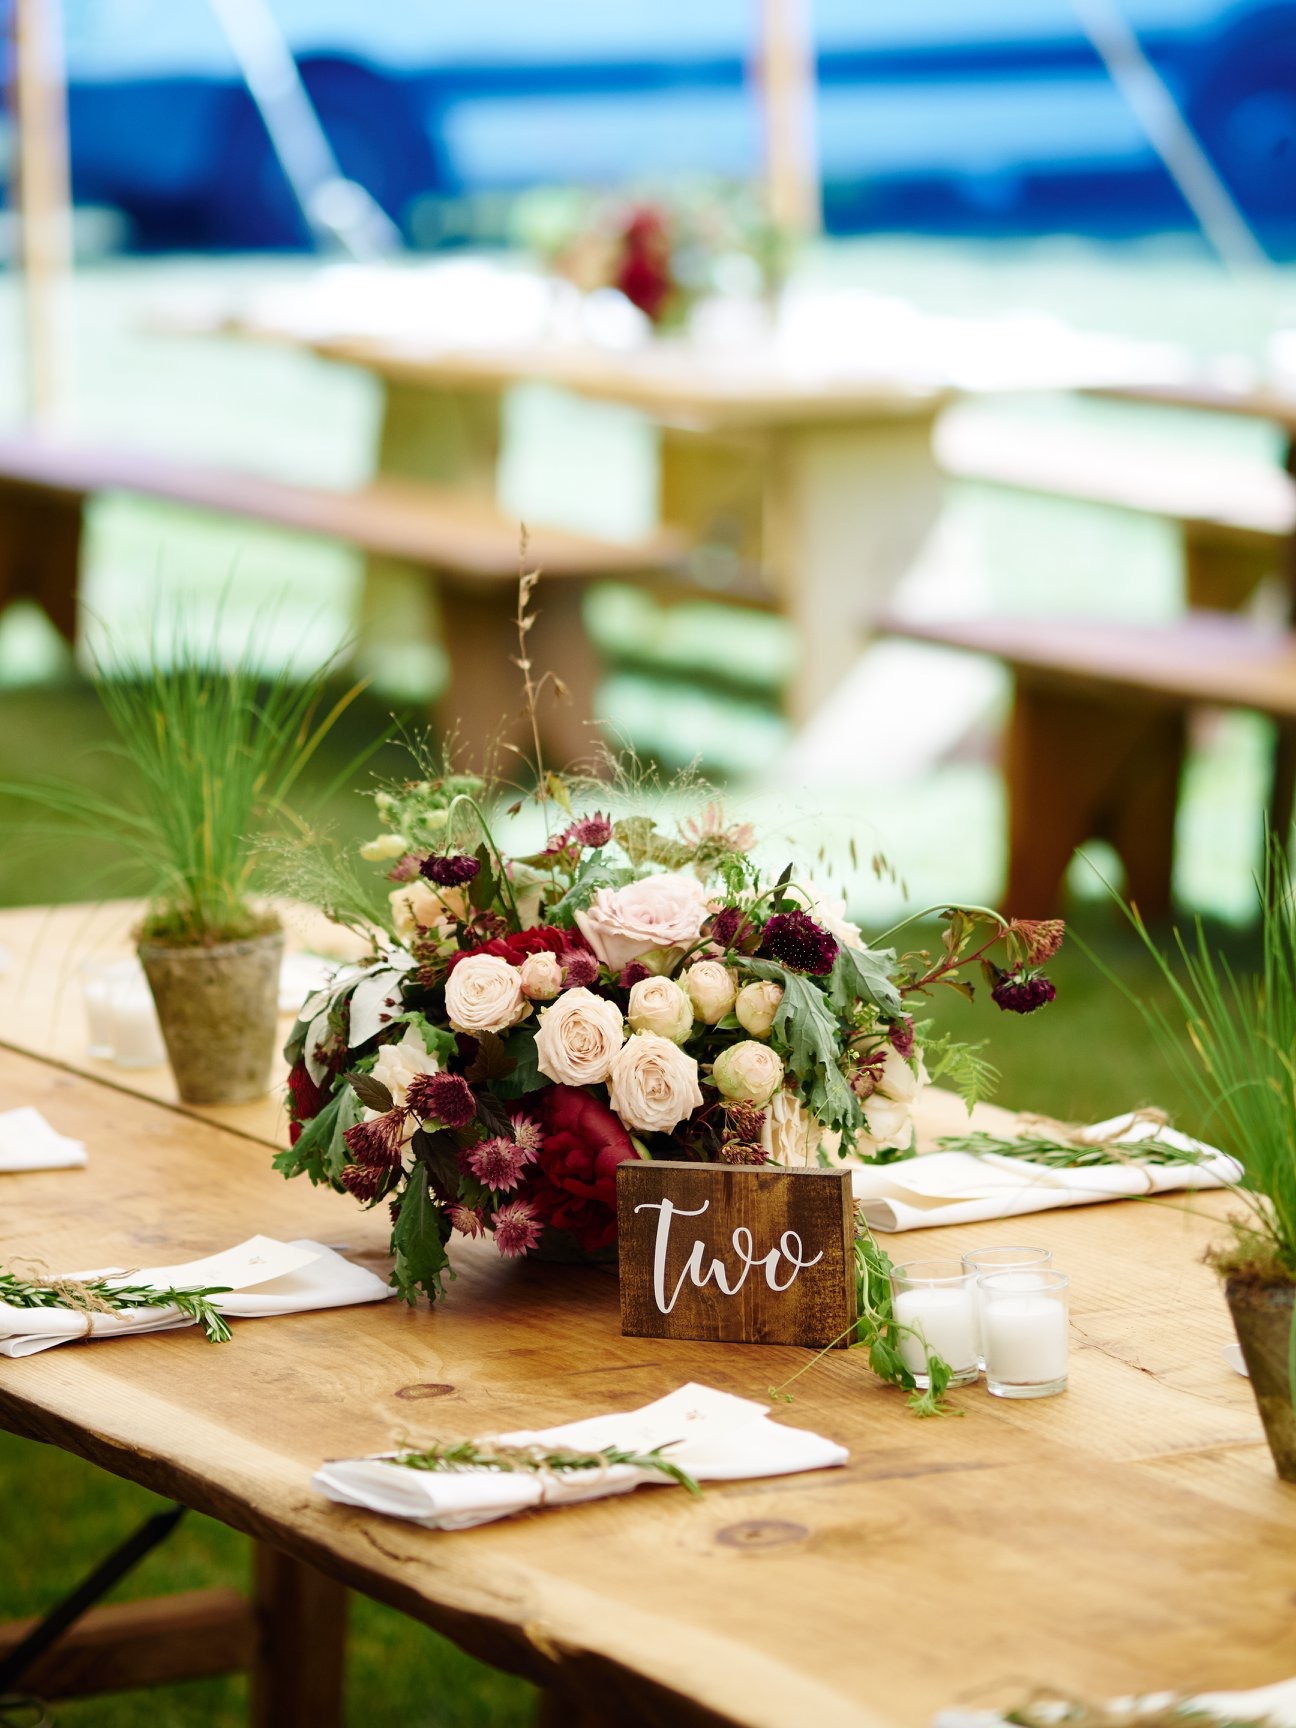 Farm tables and benches with wooden table numbers and centerpieces with plants - Pearl Weddings & Events